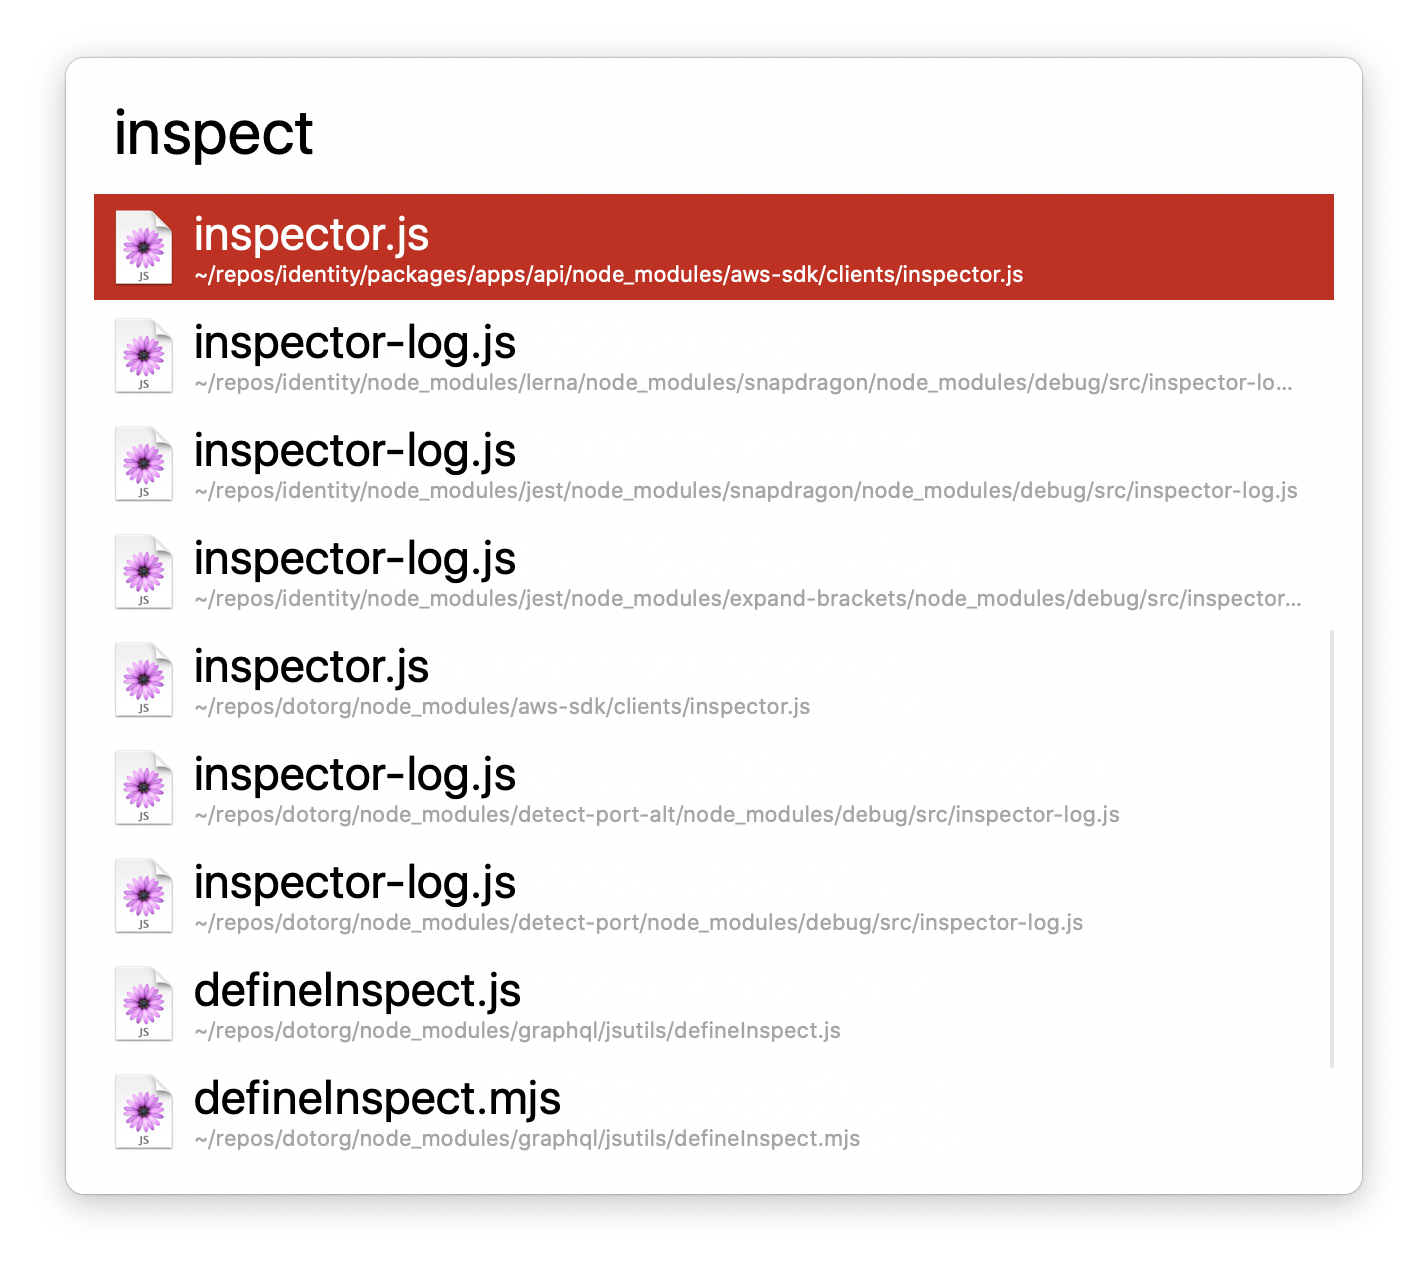 Screenshot of a search tool for the word 'inspect'. It shows a list of nine results, each with a path under it that goes to a subpath of a node_modules folder.